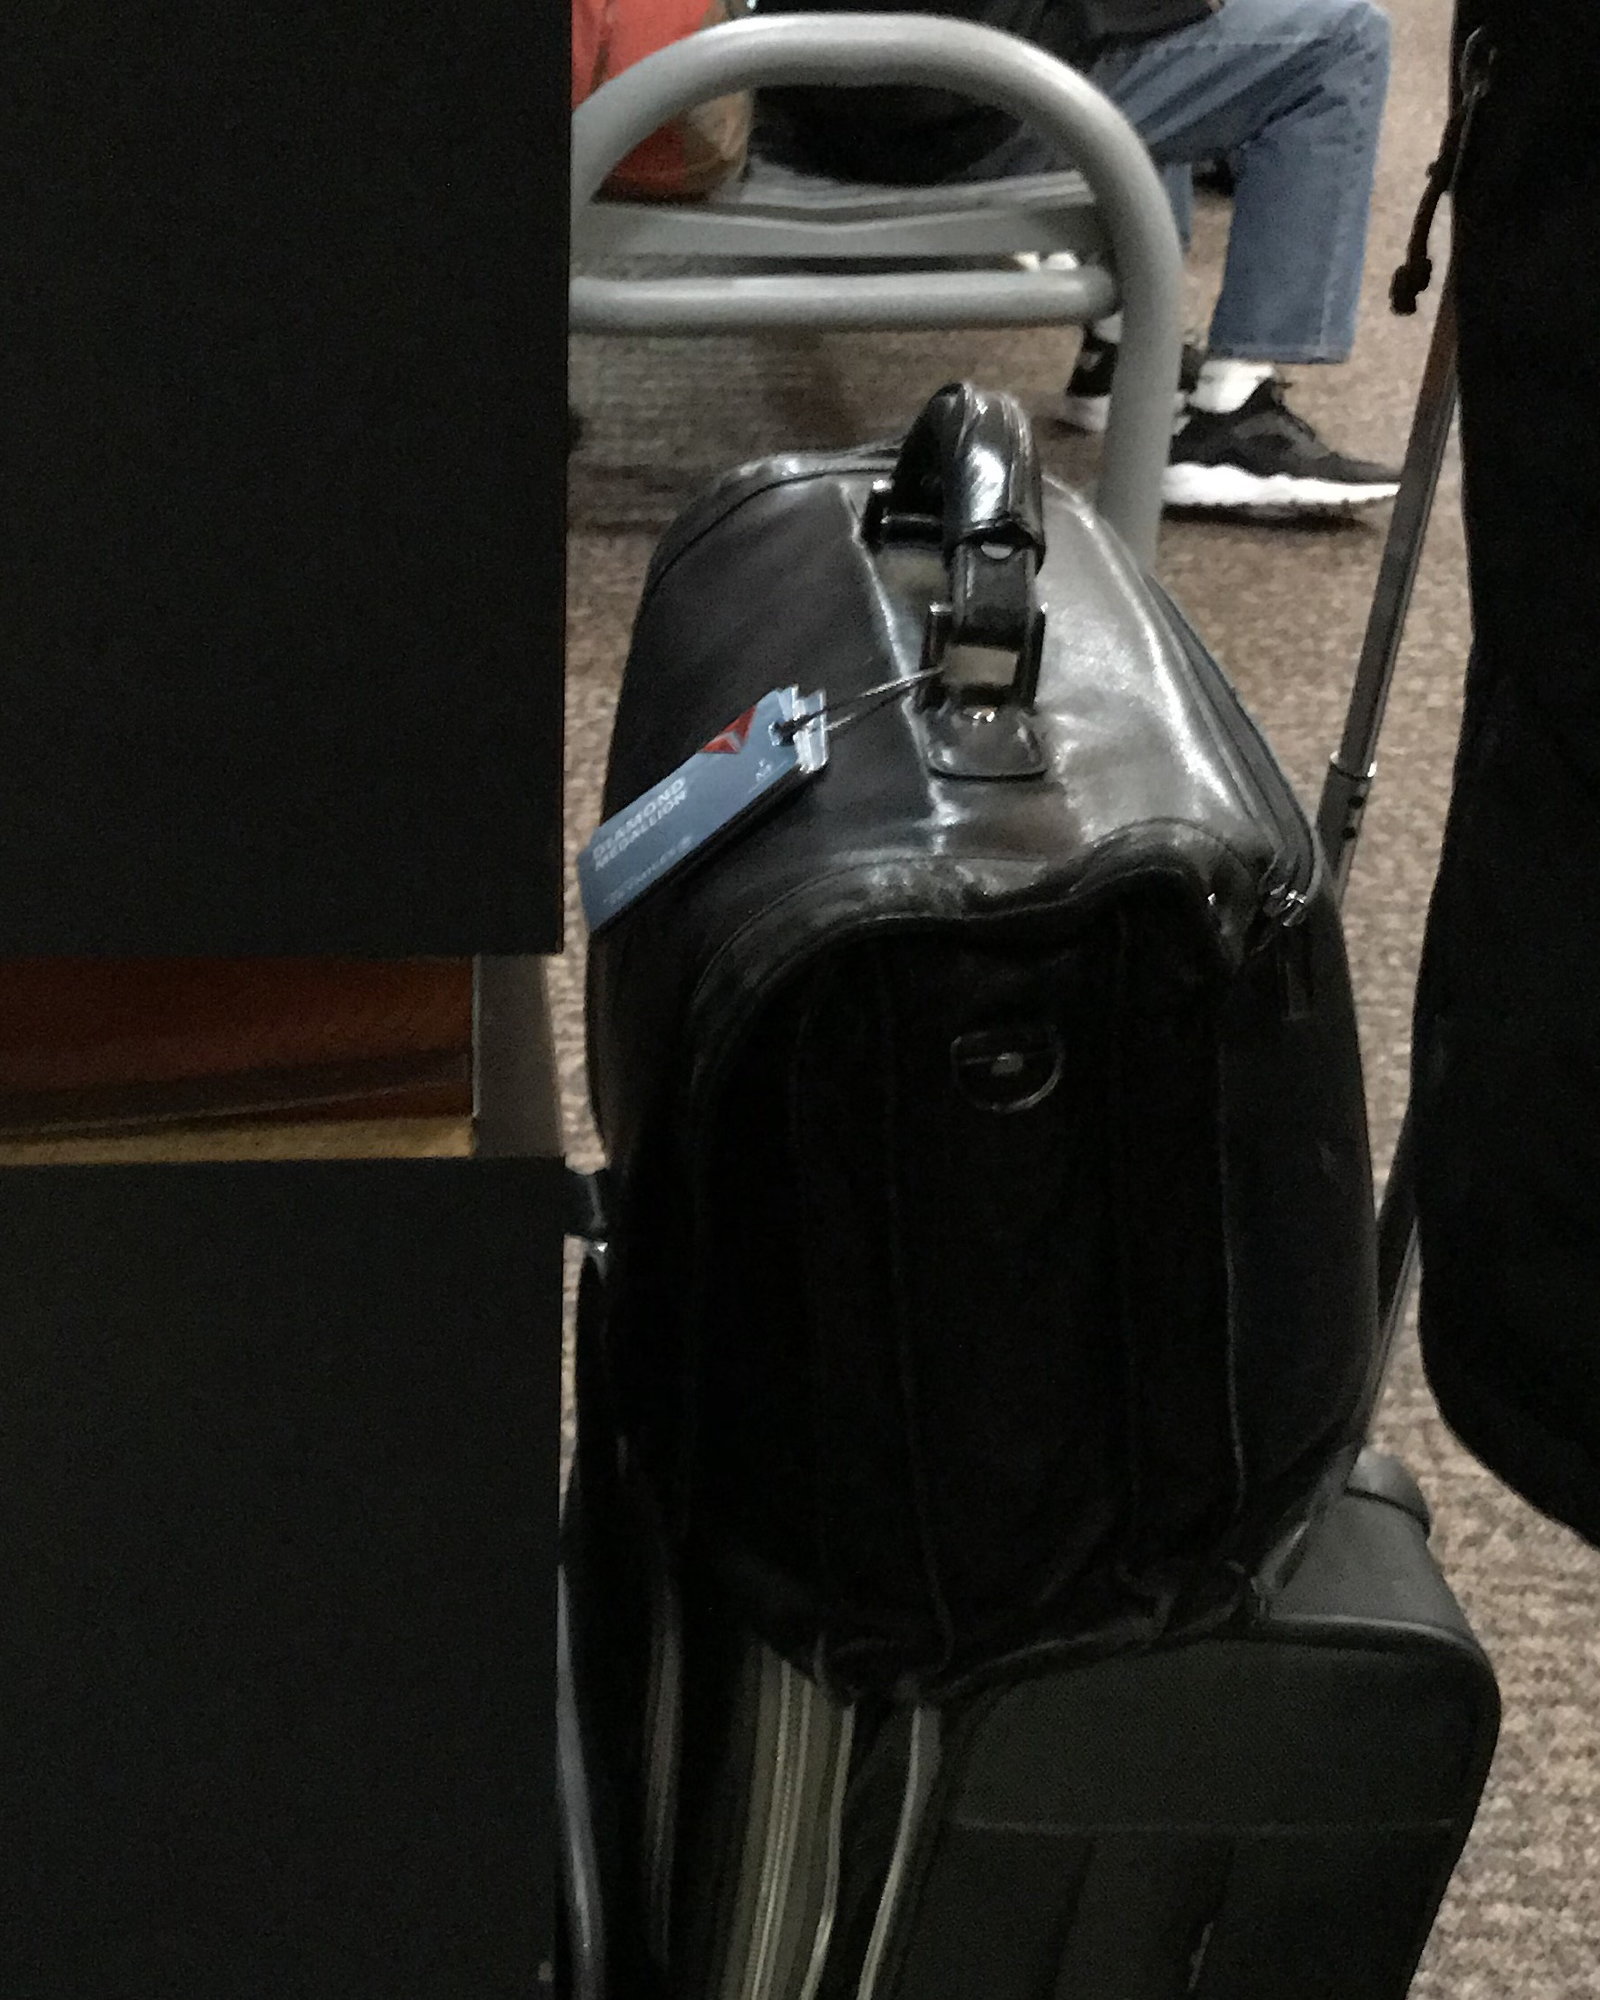 Traveling with a rolled up scientific poster - FlyerTalk Forums